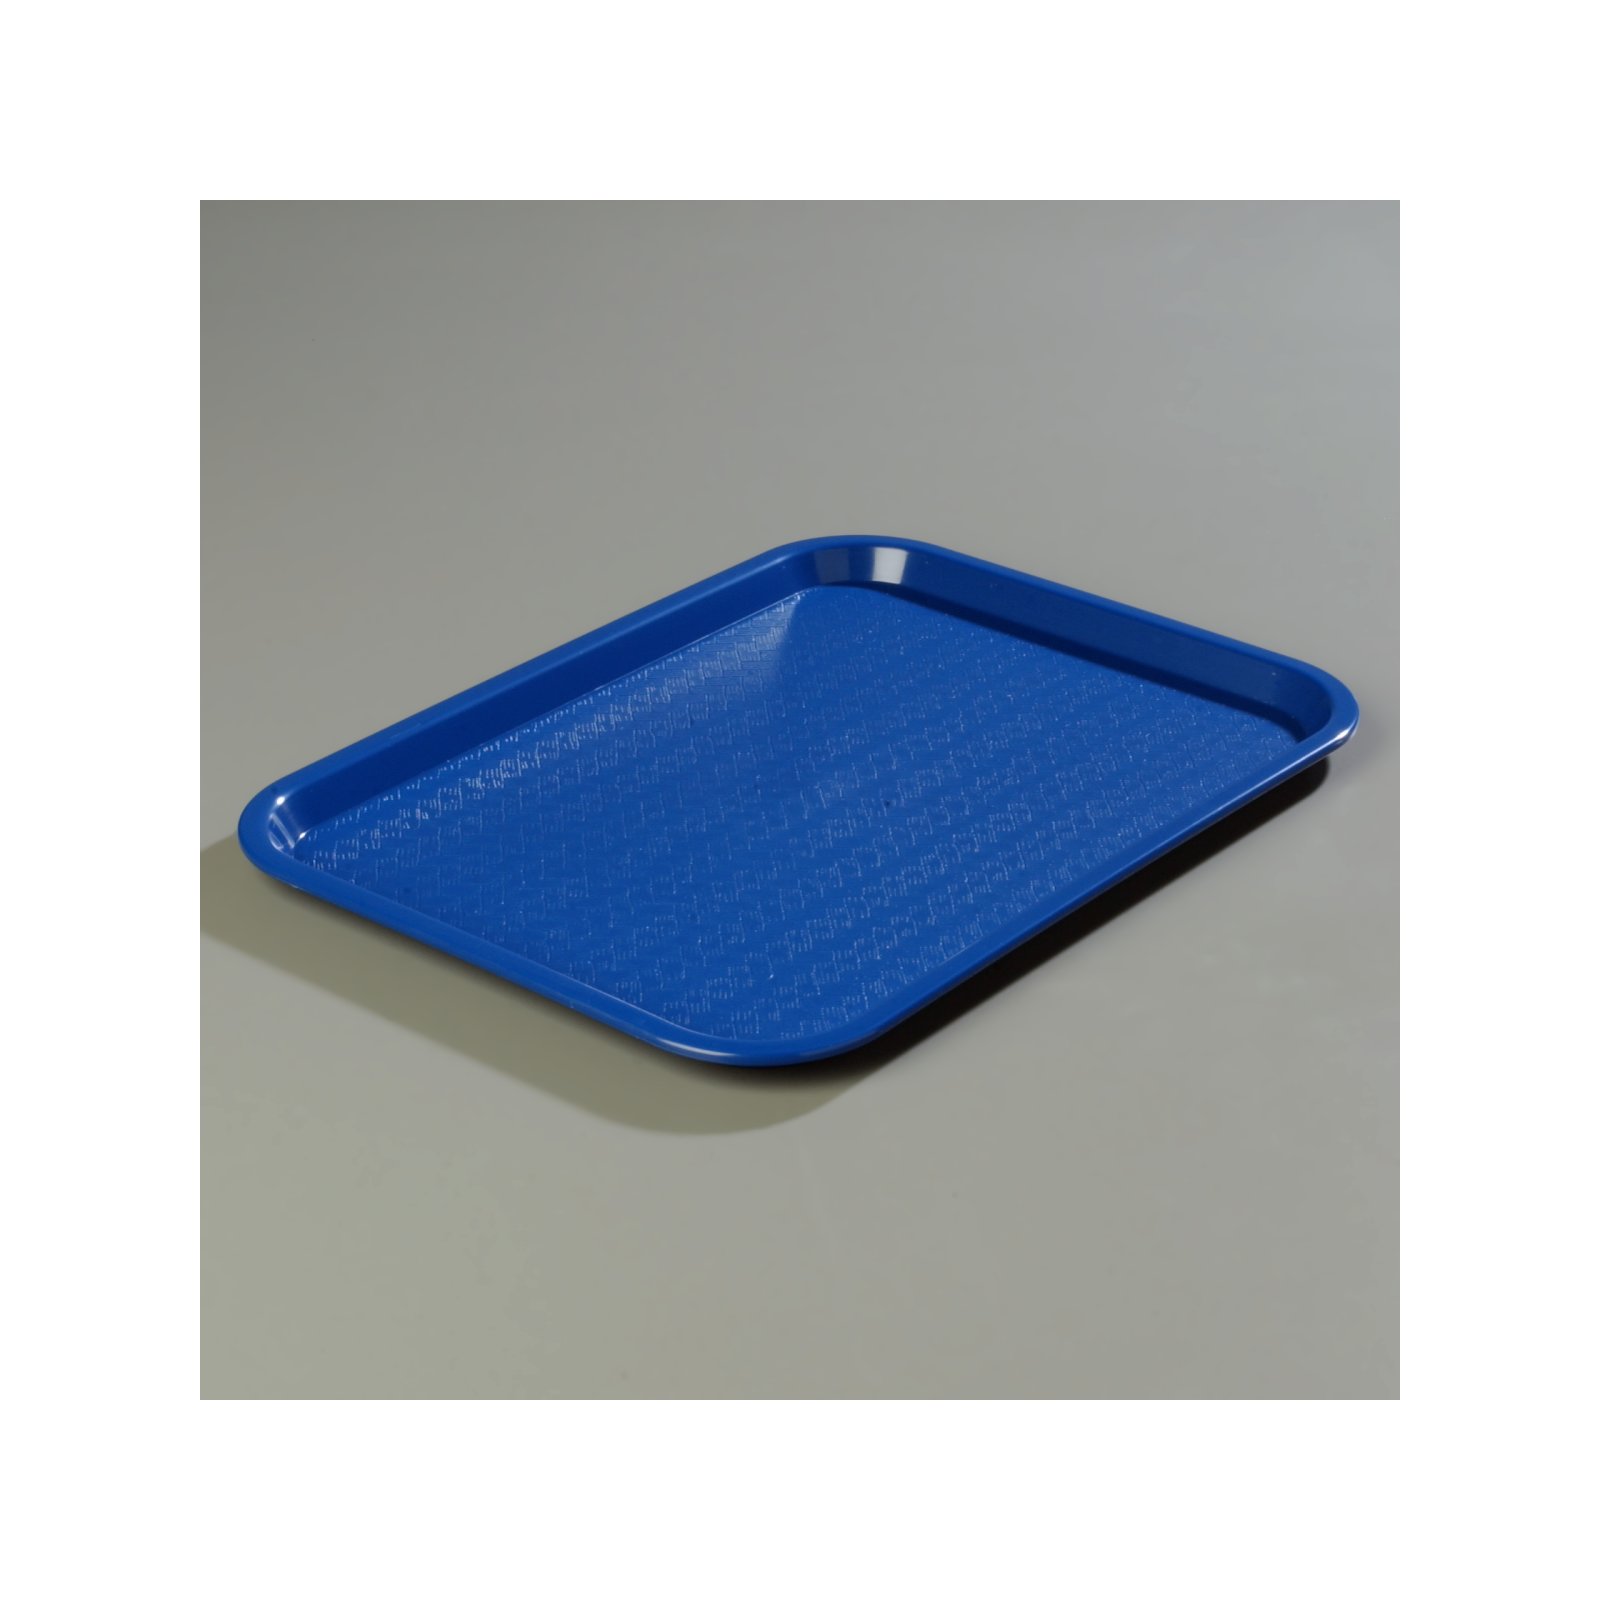 CT1216-8114 - Cafe® Fast Food Cafeteria Tray 12 x 16 - Cash & Carry  (6/pk) - Blue